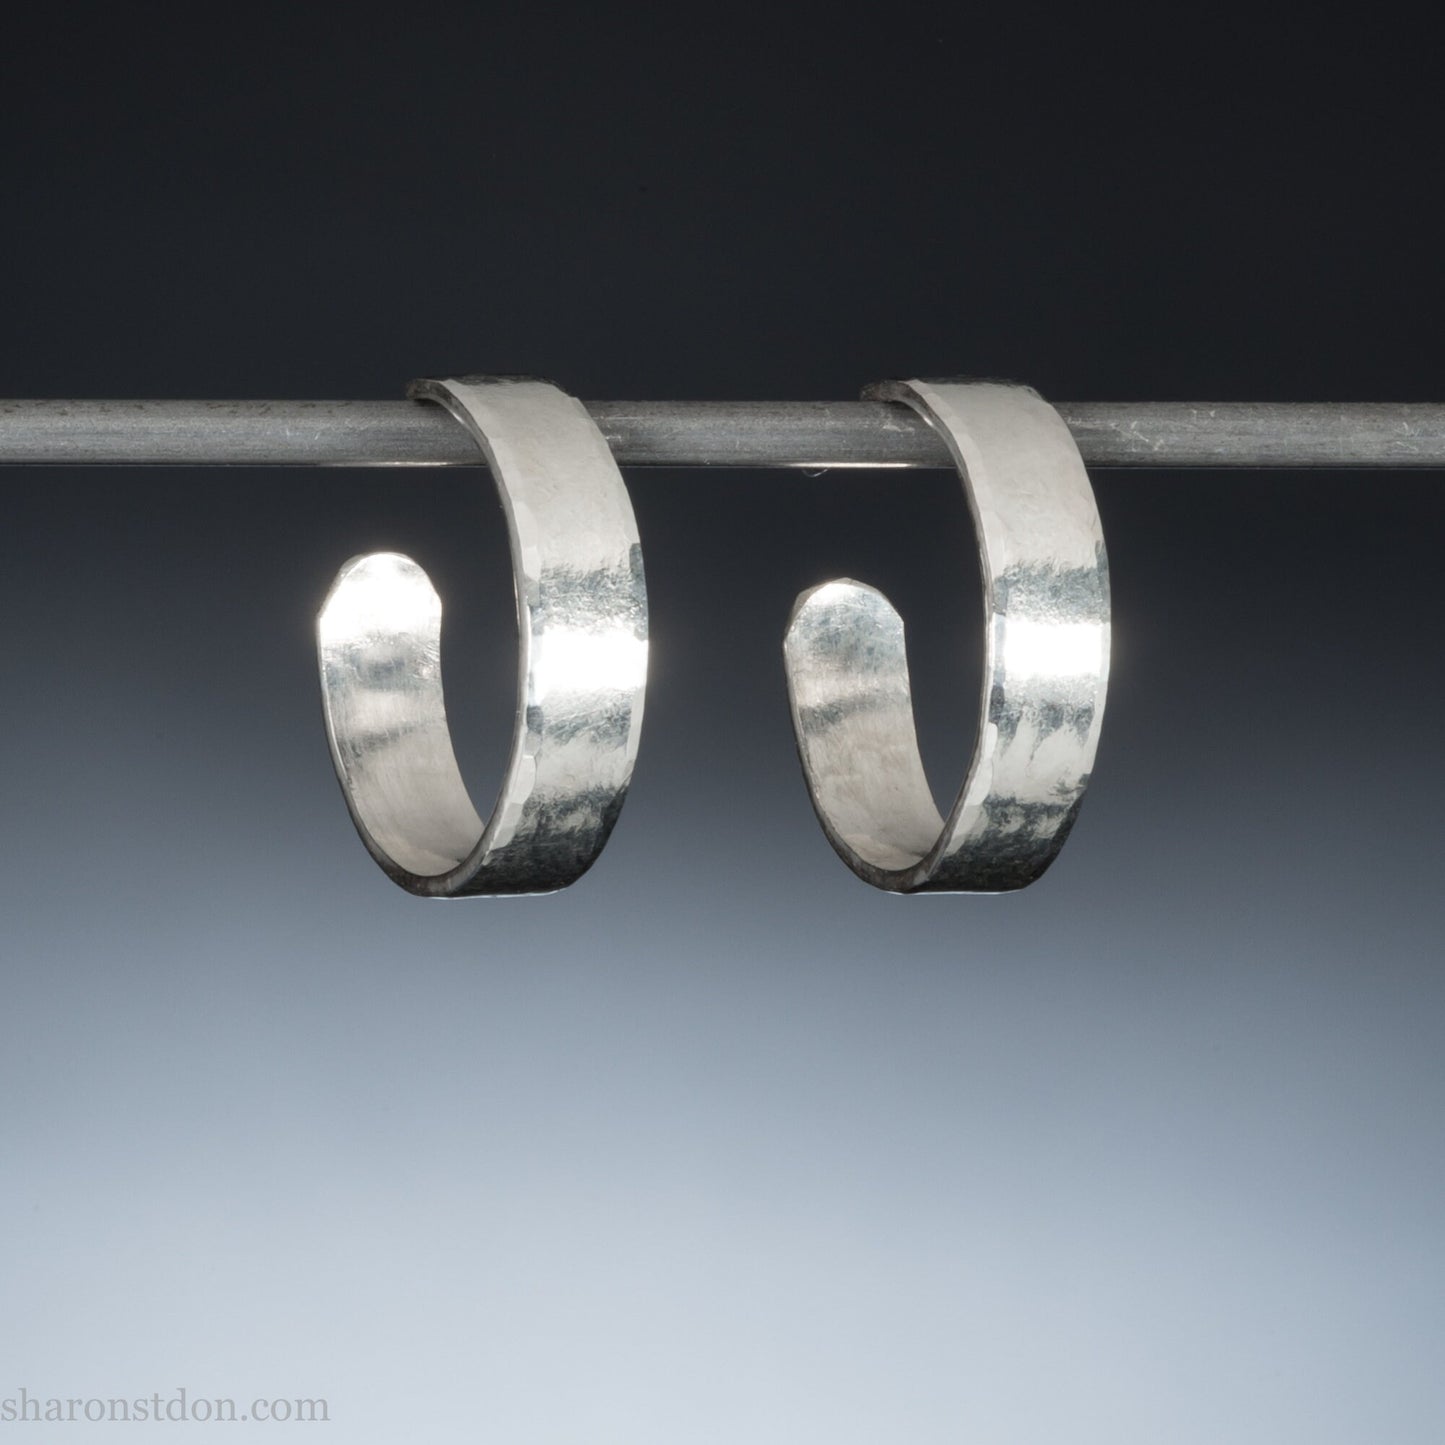 925 sterling silver hoop earrings handmade in North America by Sharon SaintDon. Small, shiny, 18mm diameter, 5mm Wide, shiny, round with hammered texture.